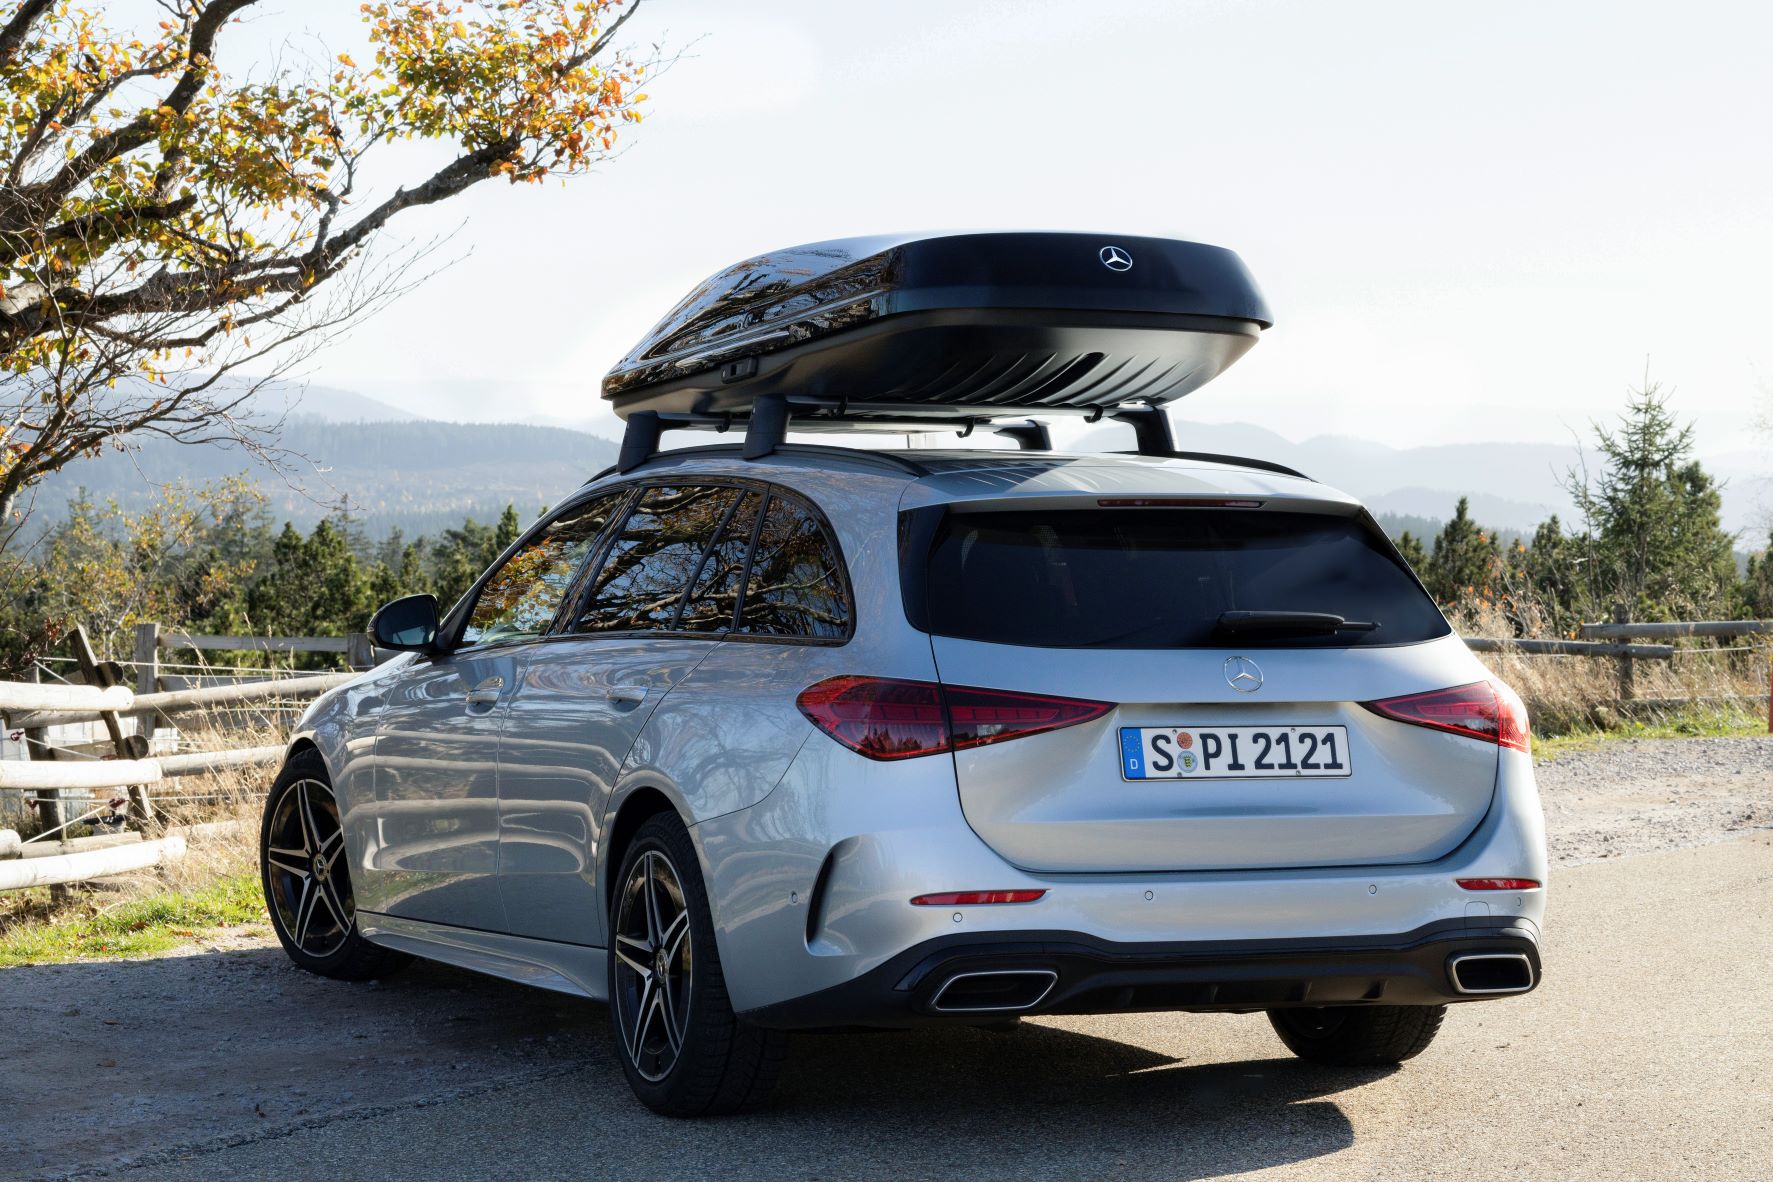 Mercedes Releases Range of Roof Boxes, Tarmac Life, Motoring, Tech